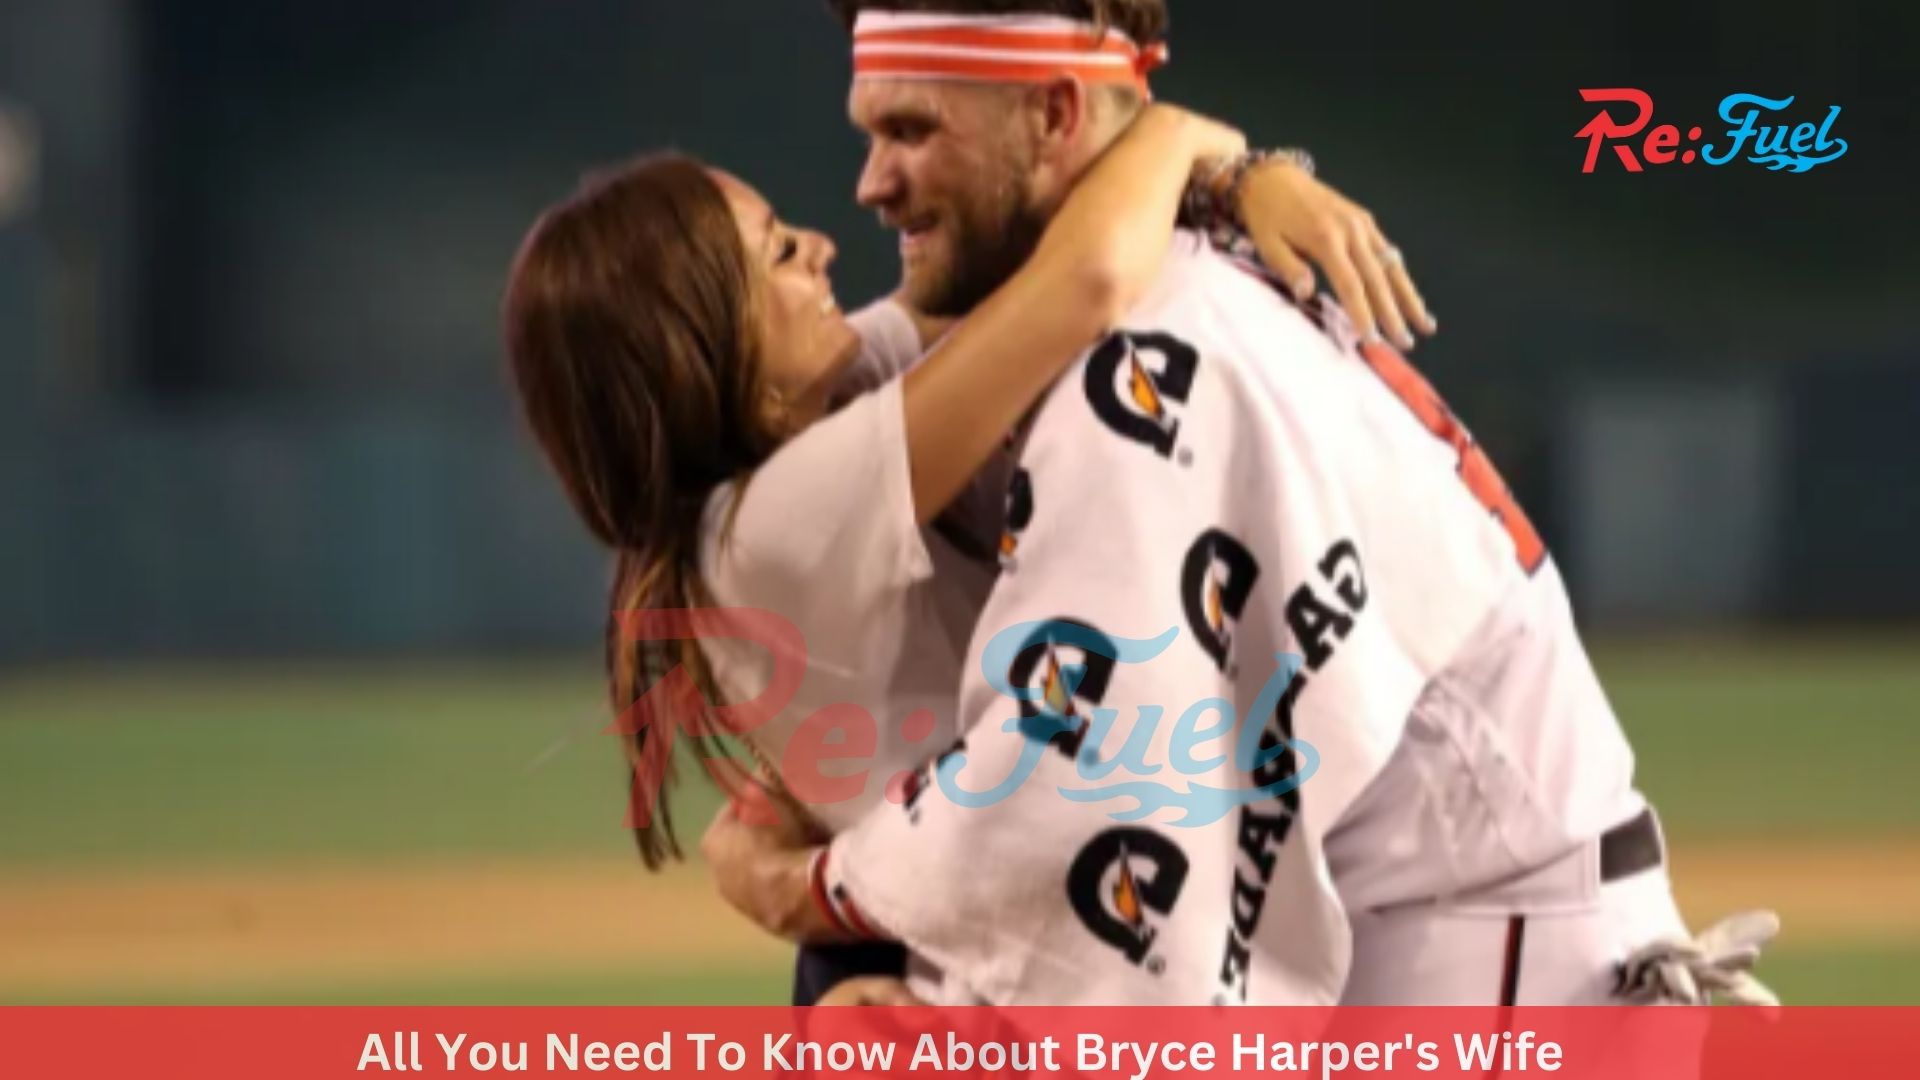 All You Need To Know About Bryce Harper's Wife